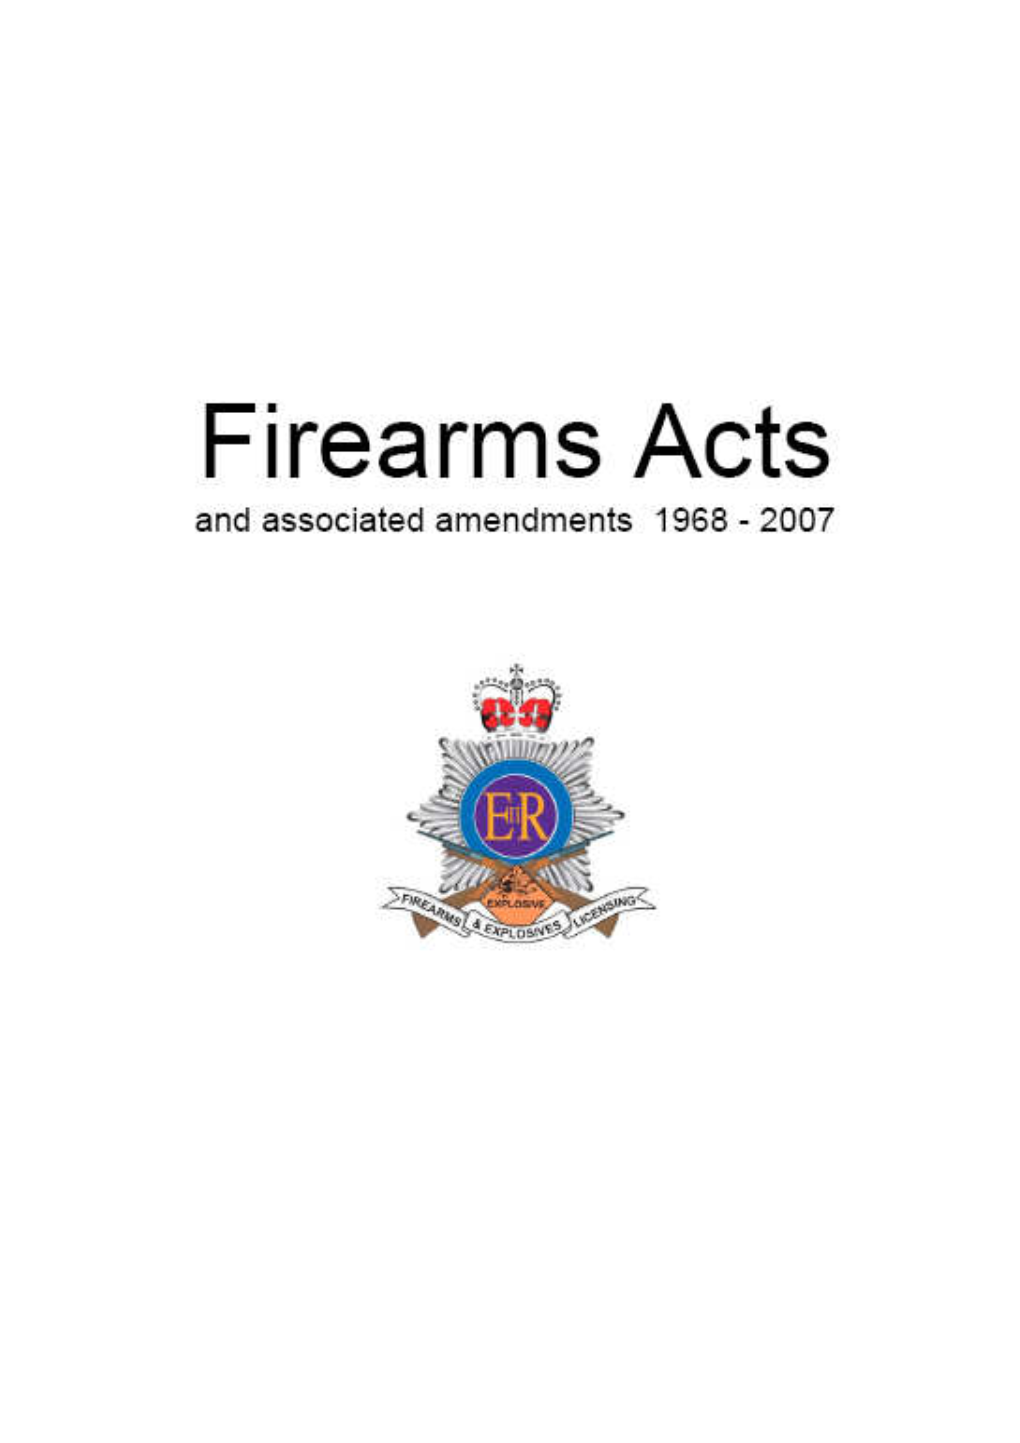 FIREARMS ACTS and Associated Amendments 1968 – 2007